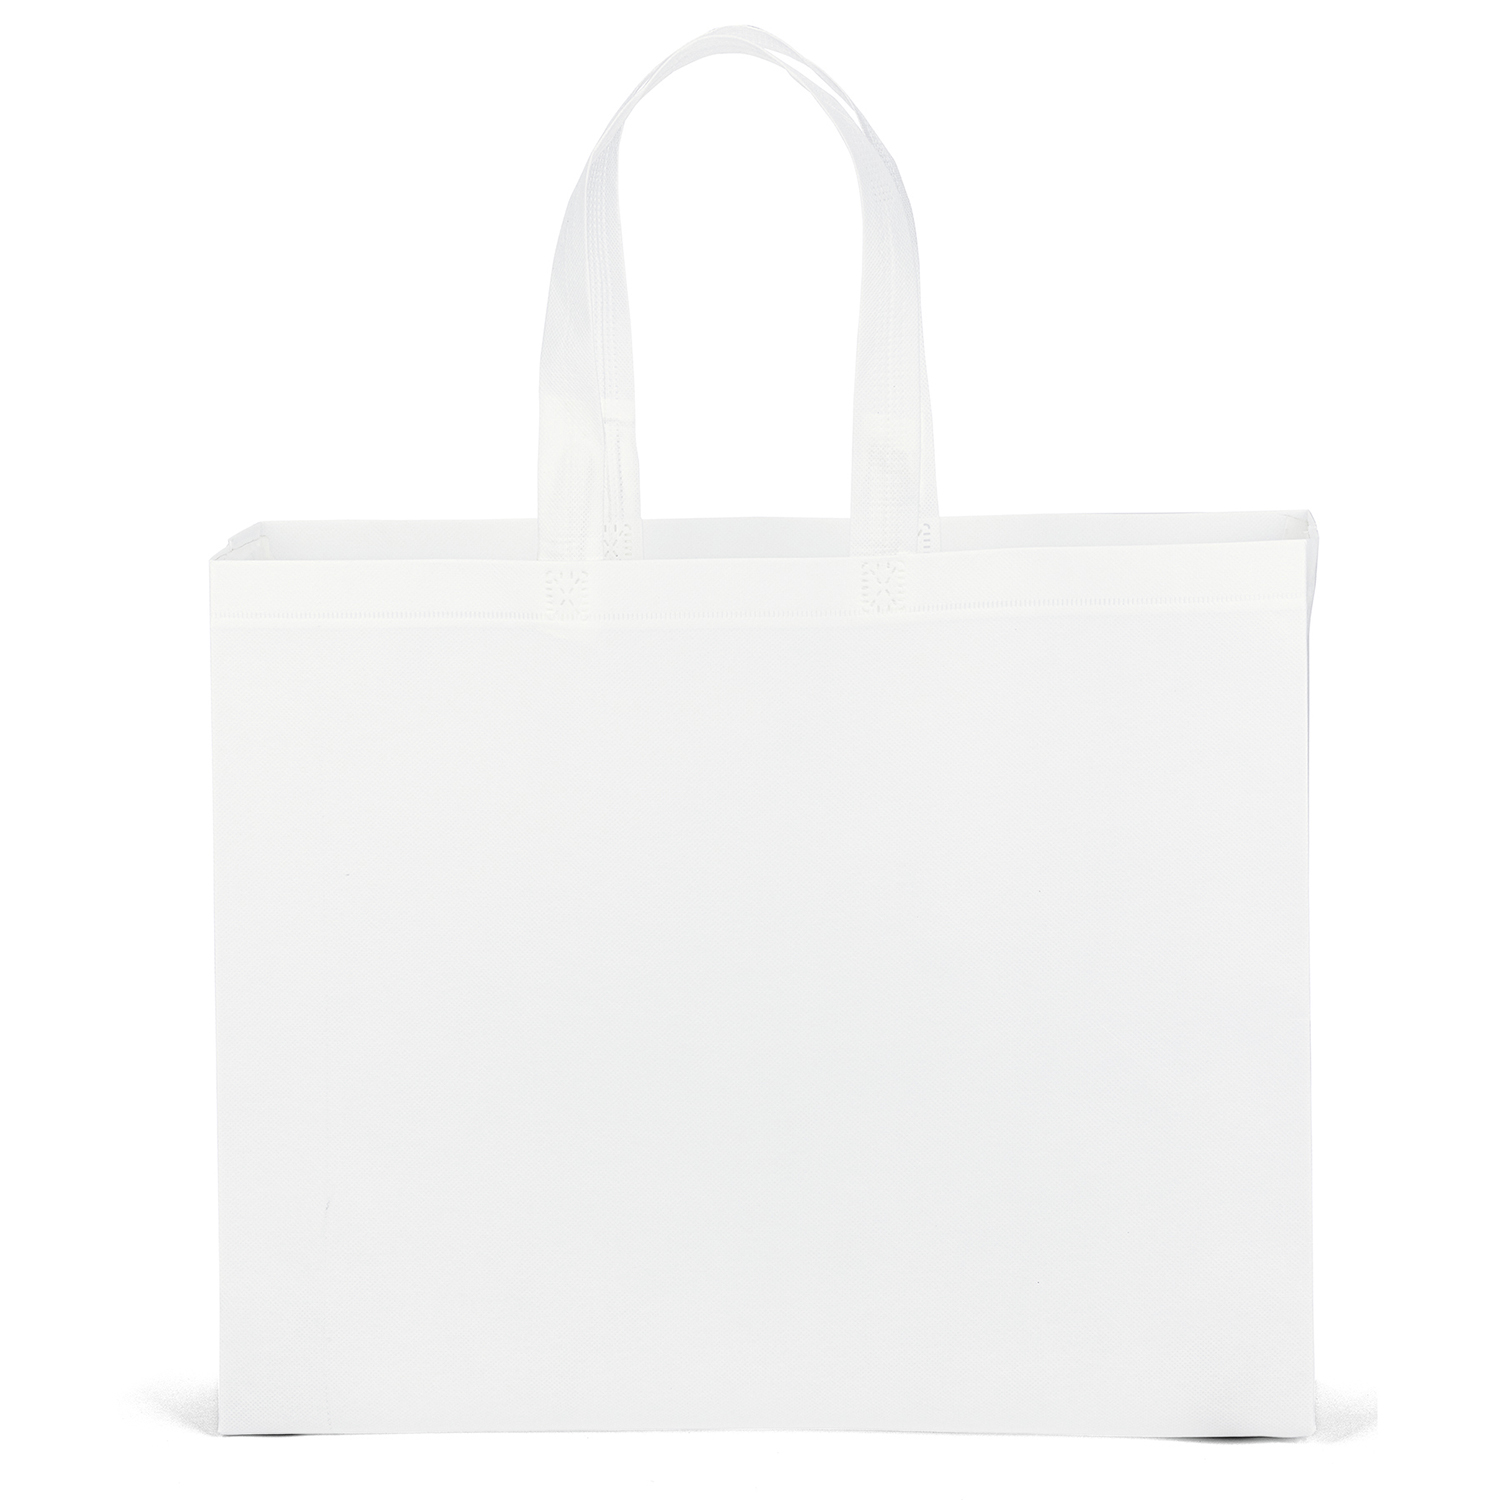 Bag Makers DYLP1915 - Custom Printed Eco-Friendly Promotional Non-Woven Grocery Tote Bag